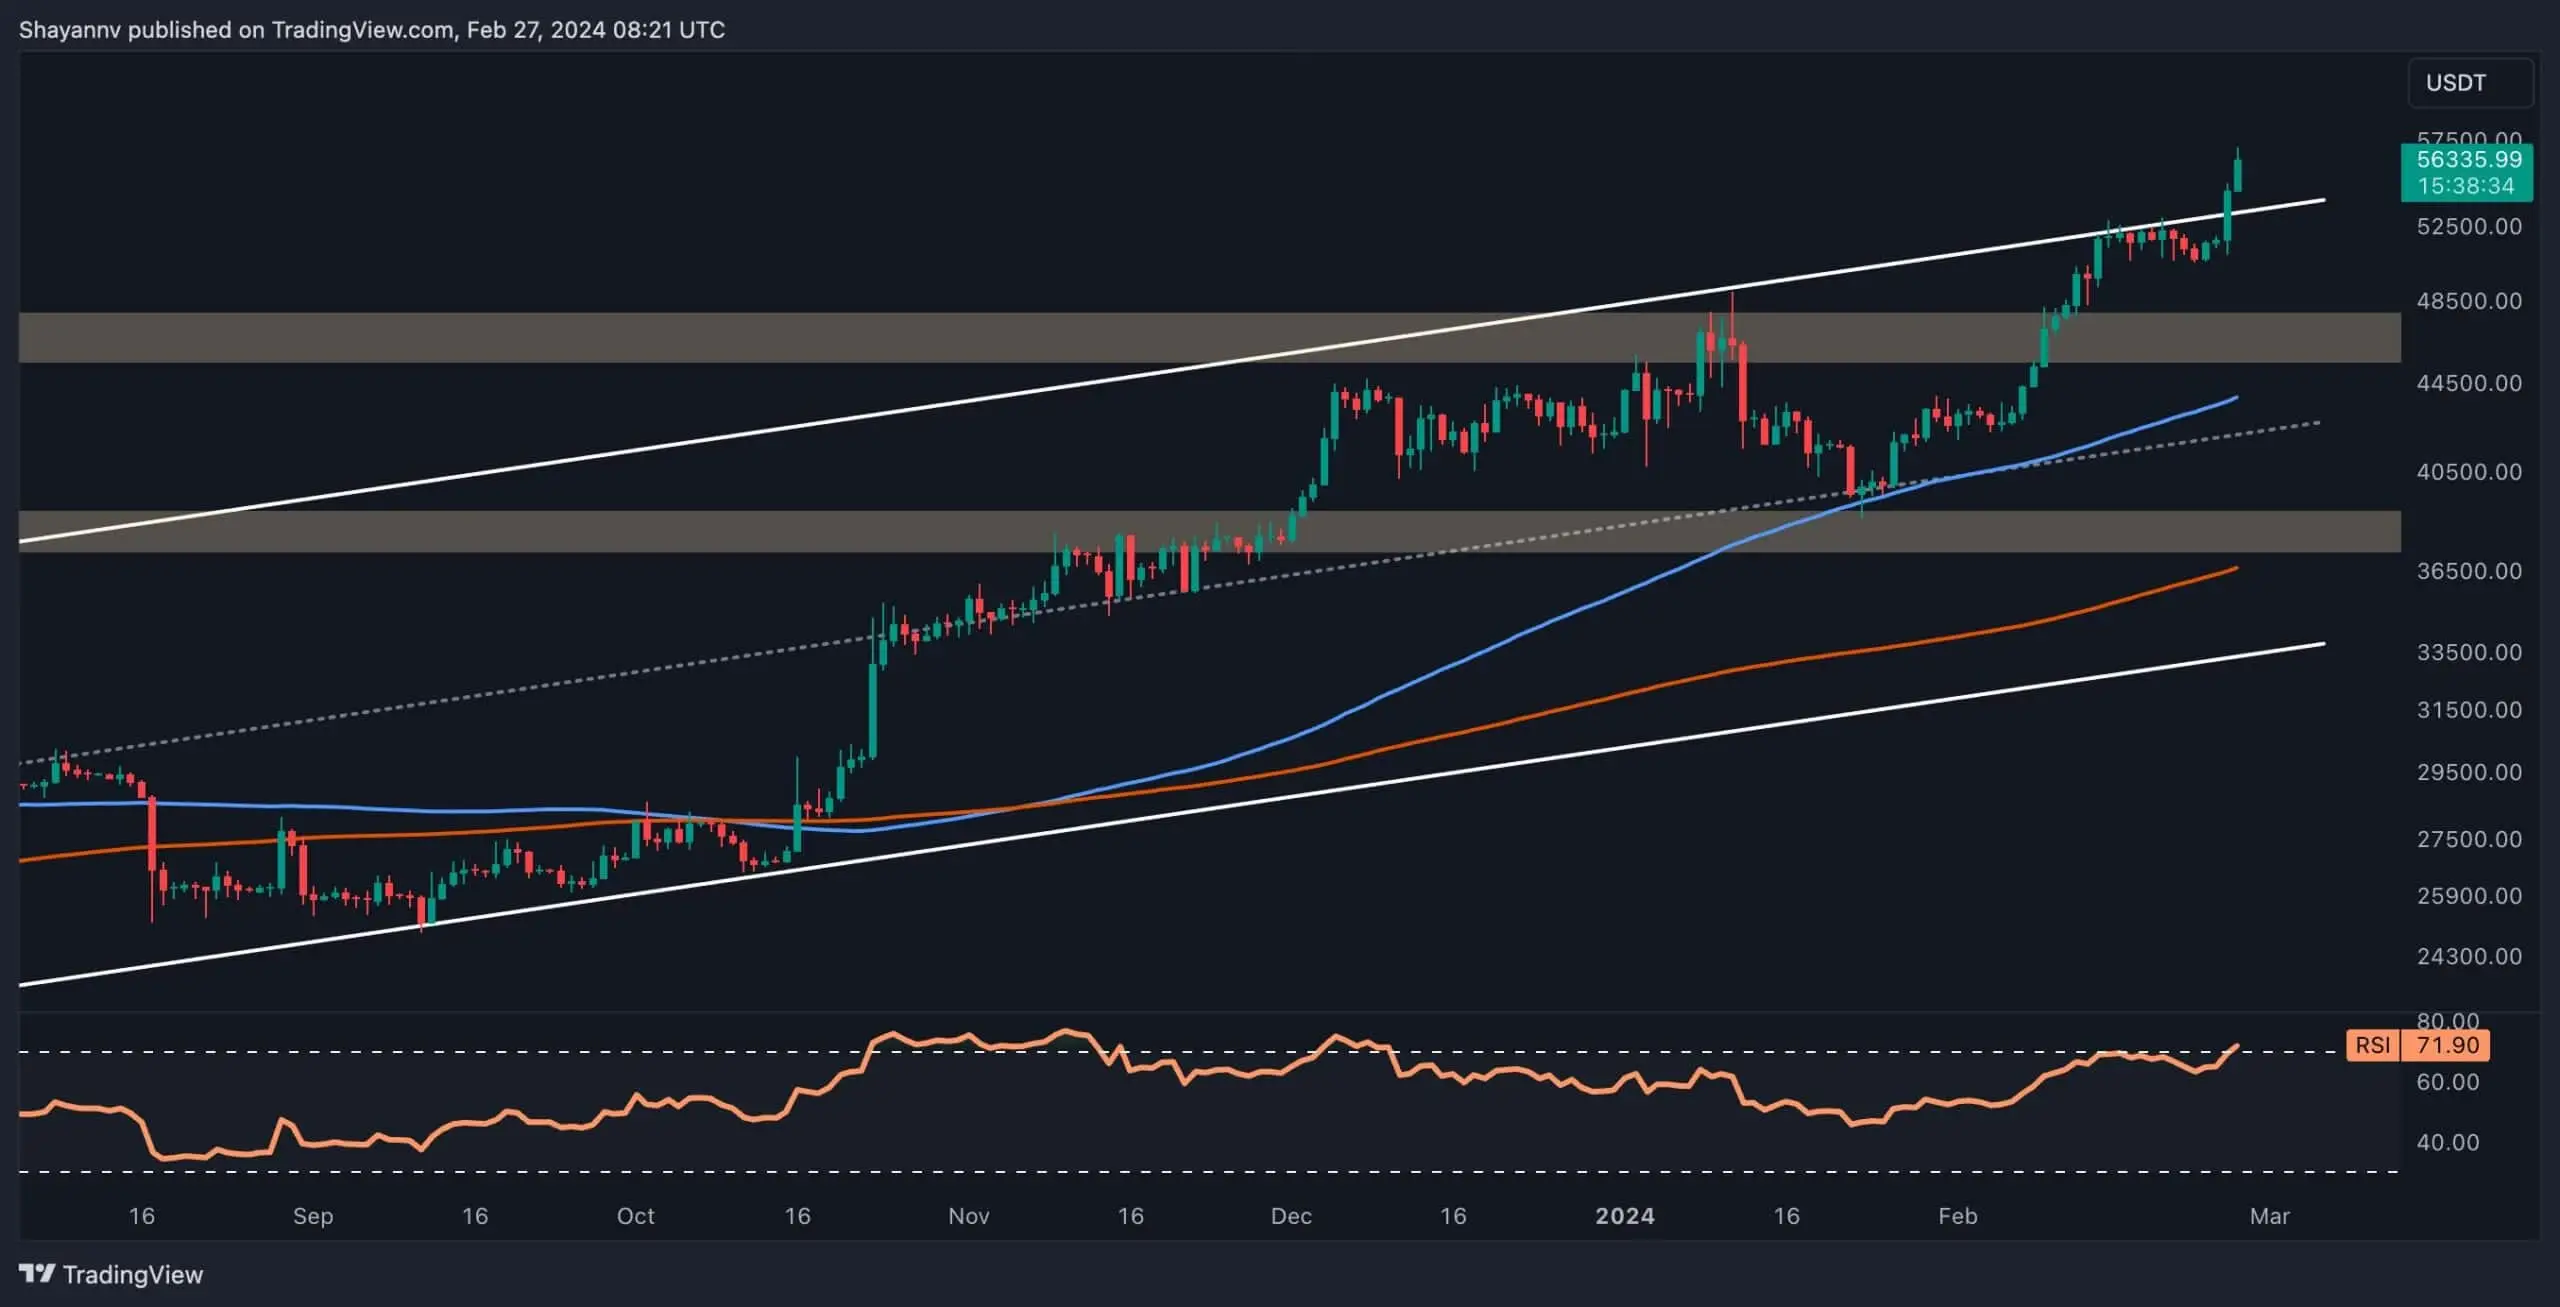 Bitcoin Surges Despite Bearish Signals: Technical and On-chain Analysis